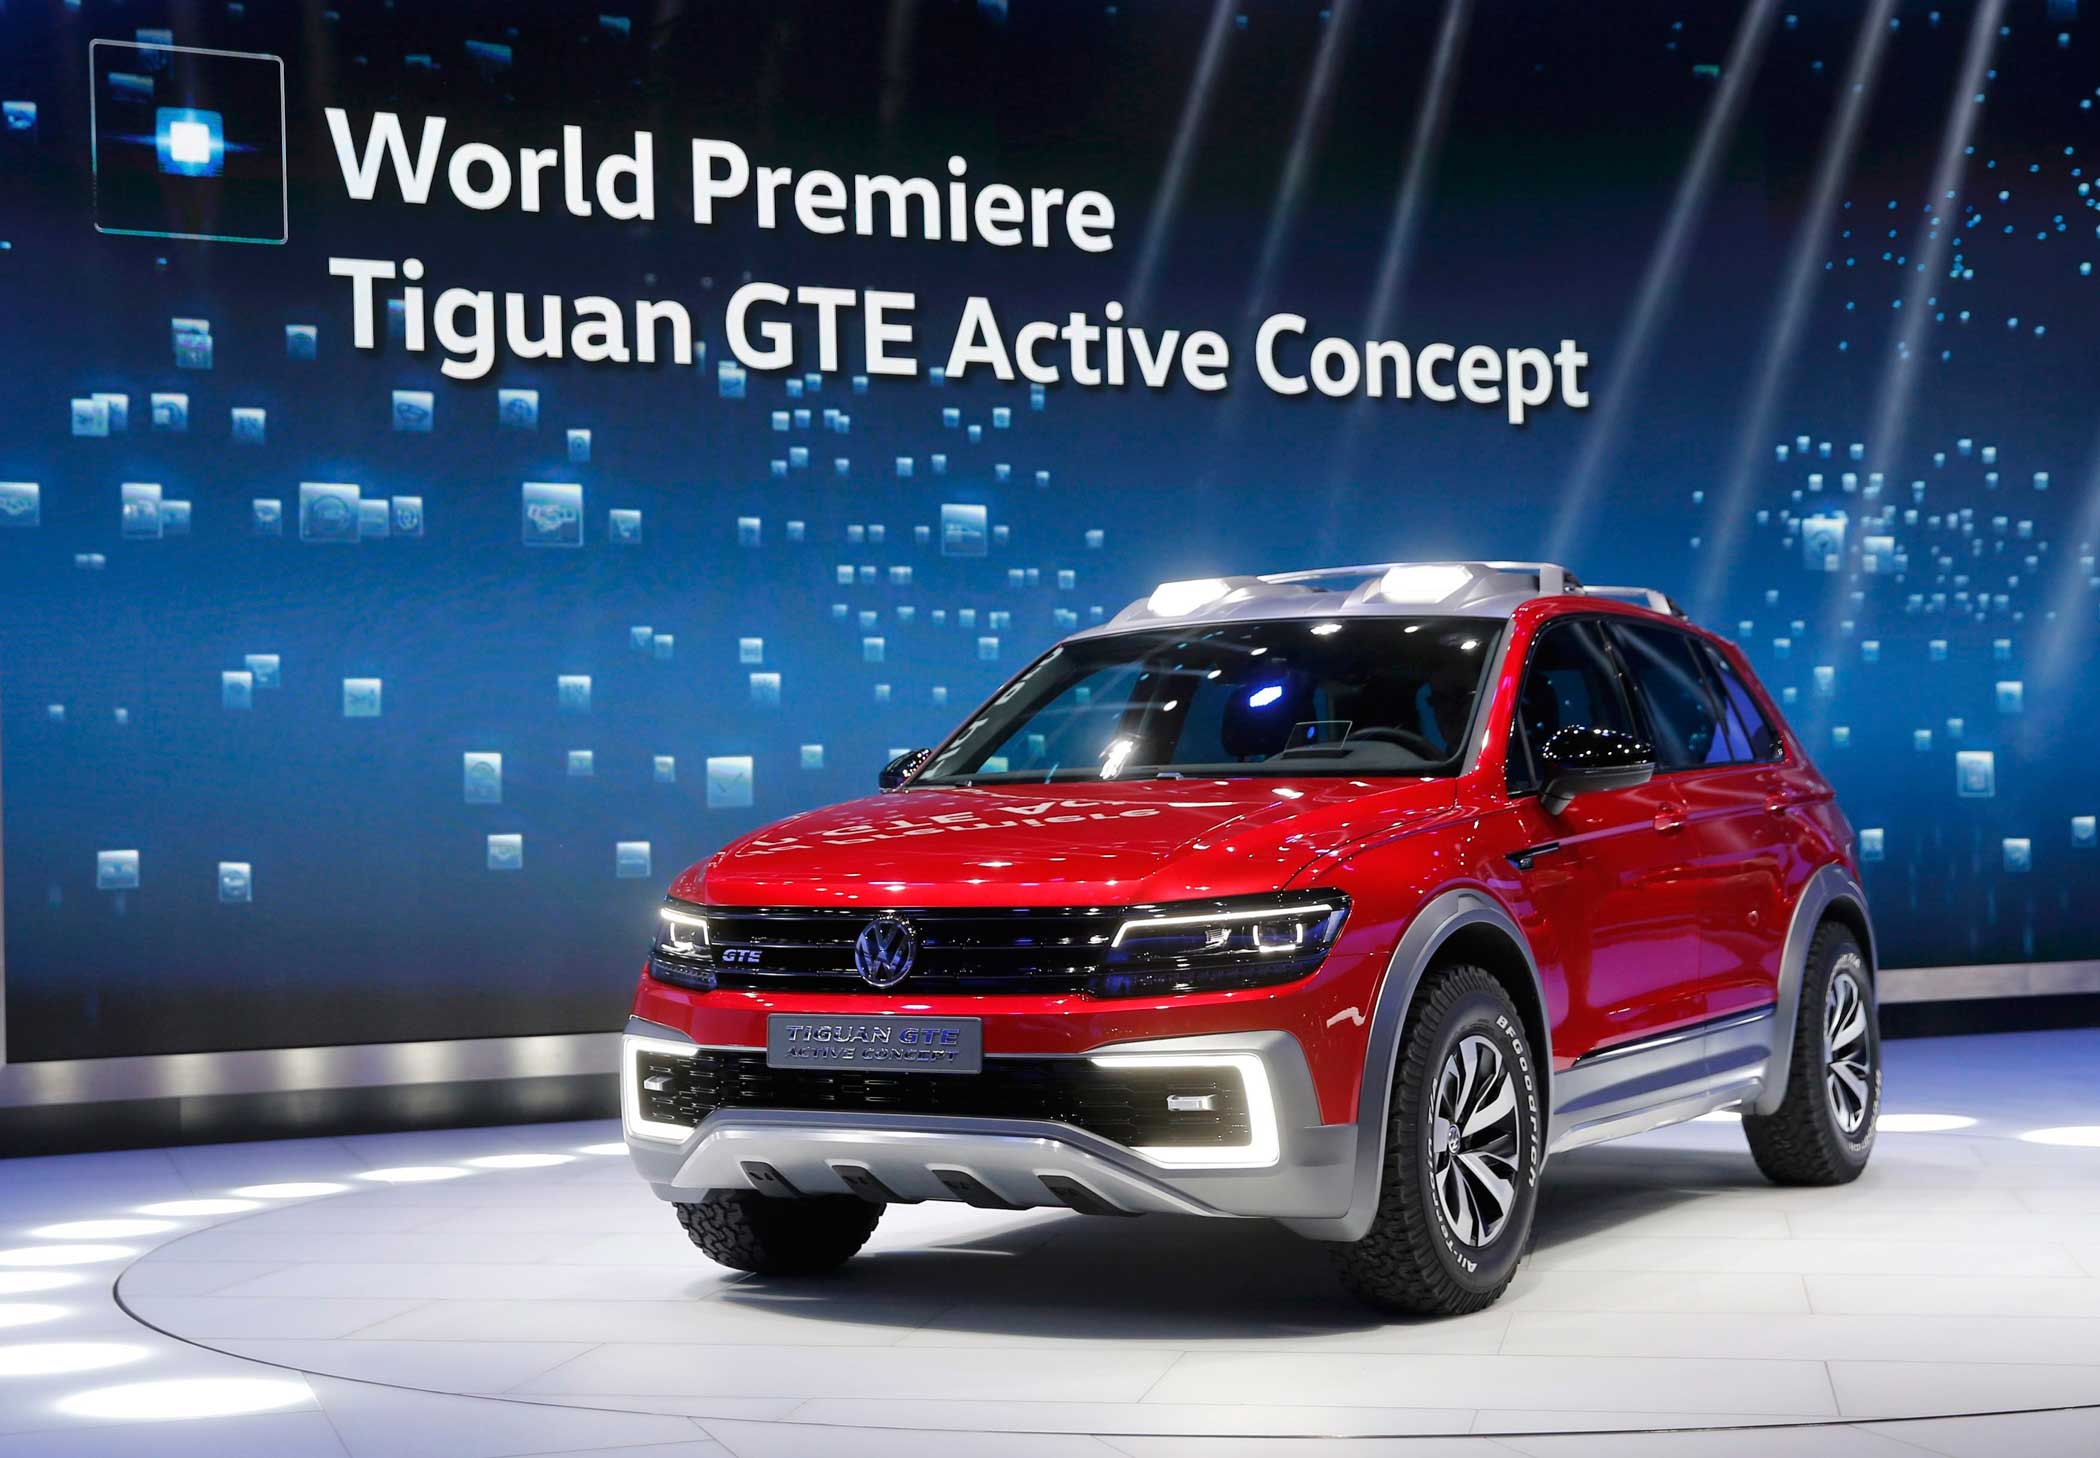 The Volkswagen Tiguan GTE Active Concept car is displayed at the North American International Auto Show in Detroit